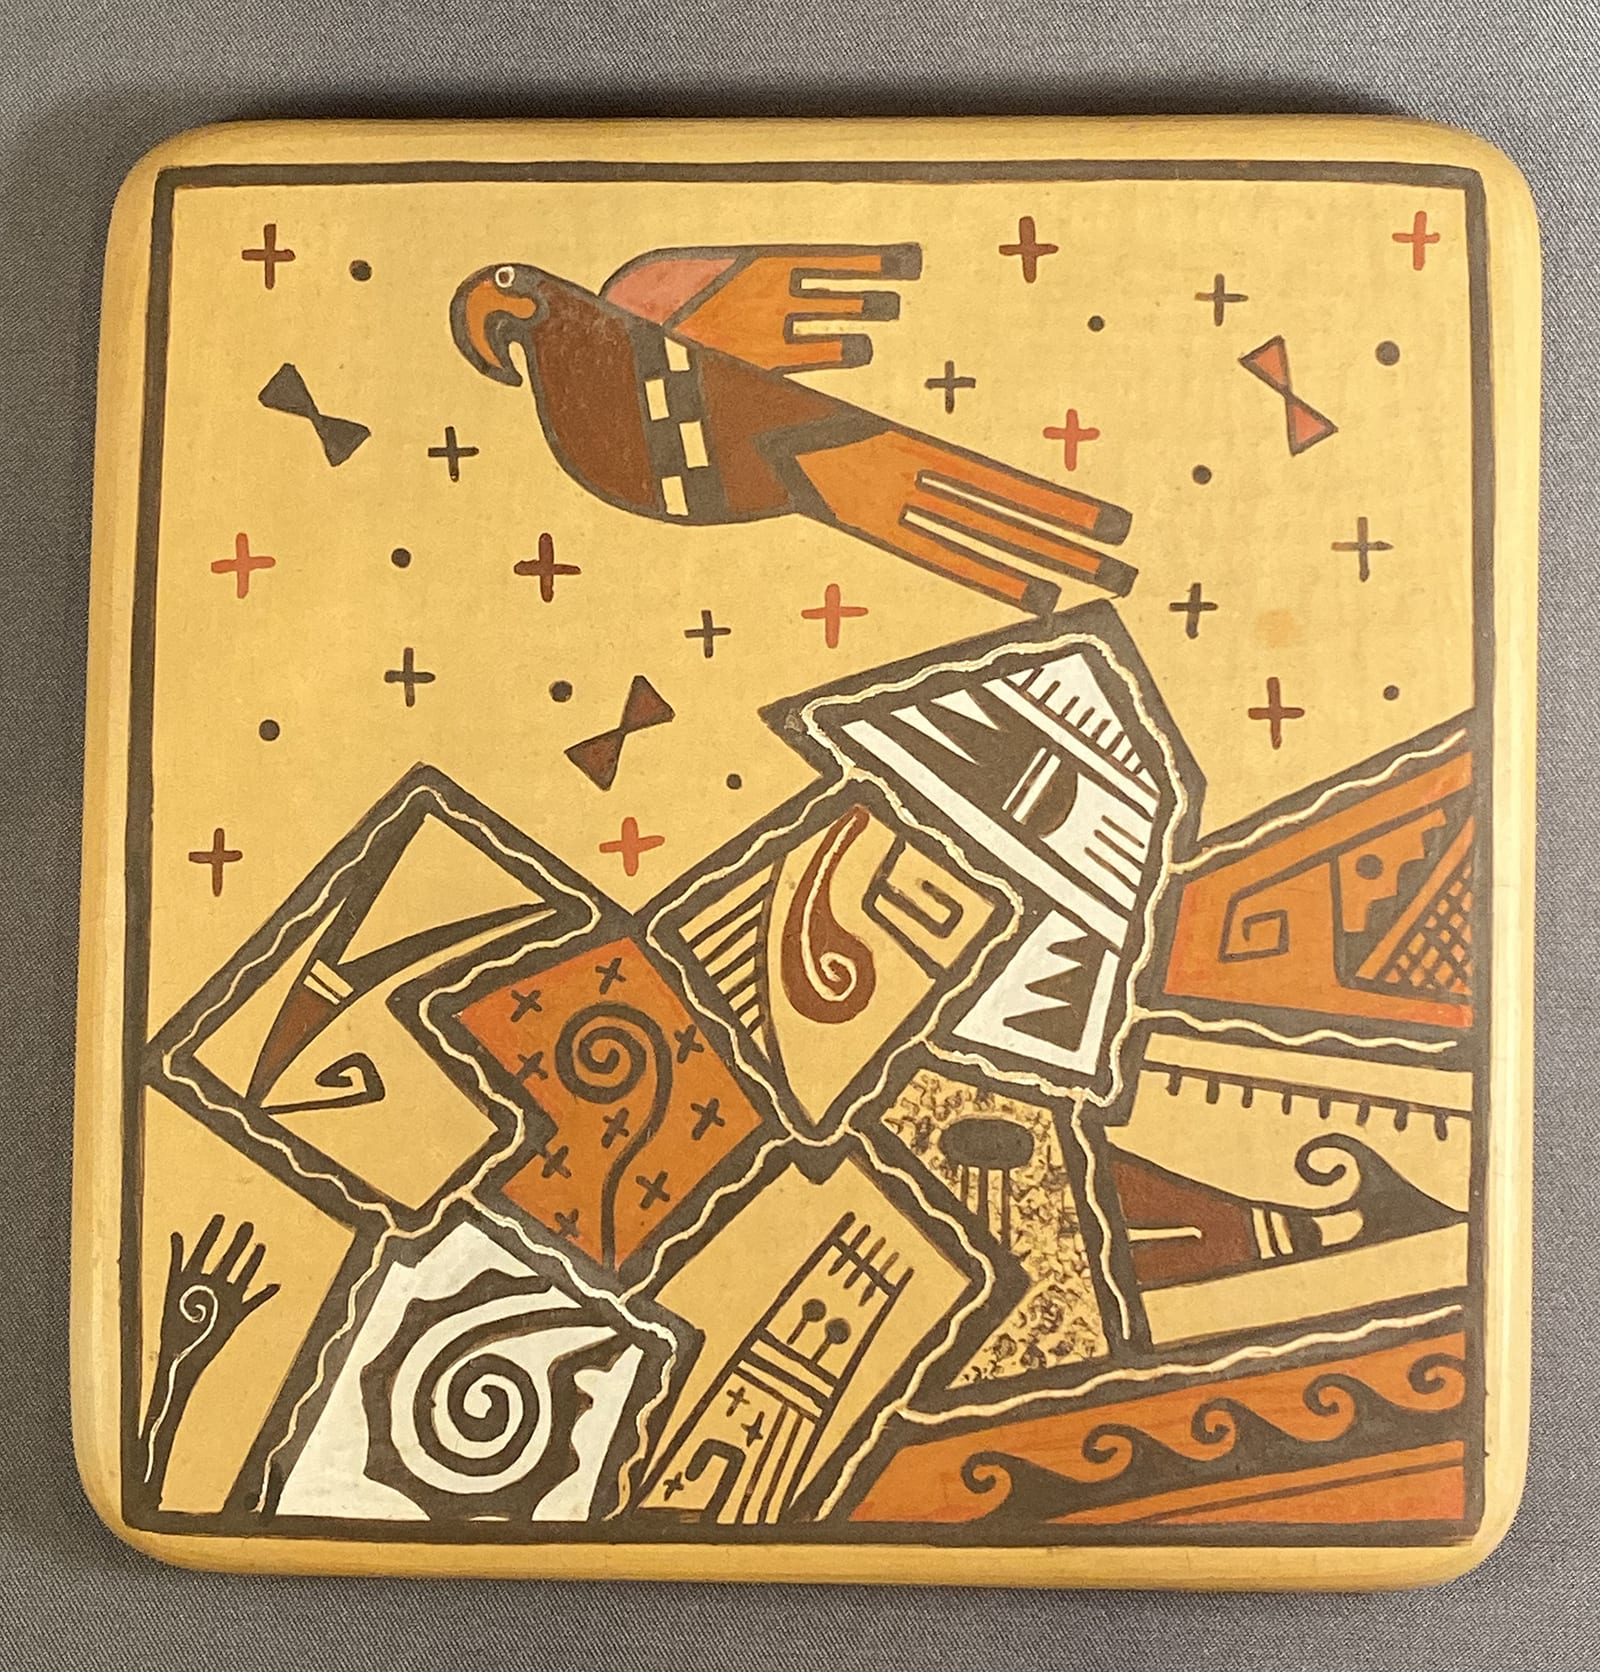 2019-23  Tile with parrot and shard design